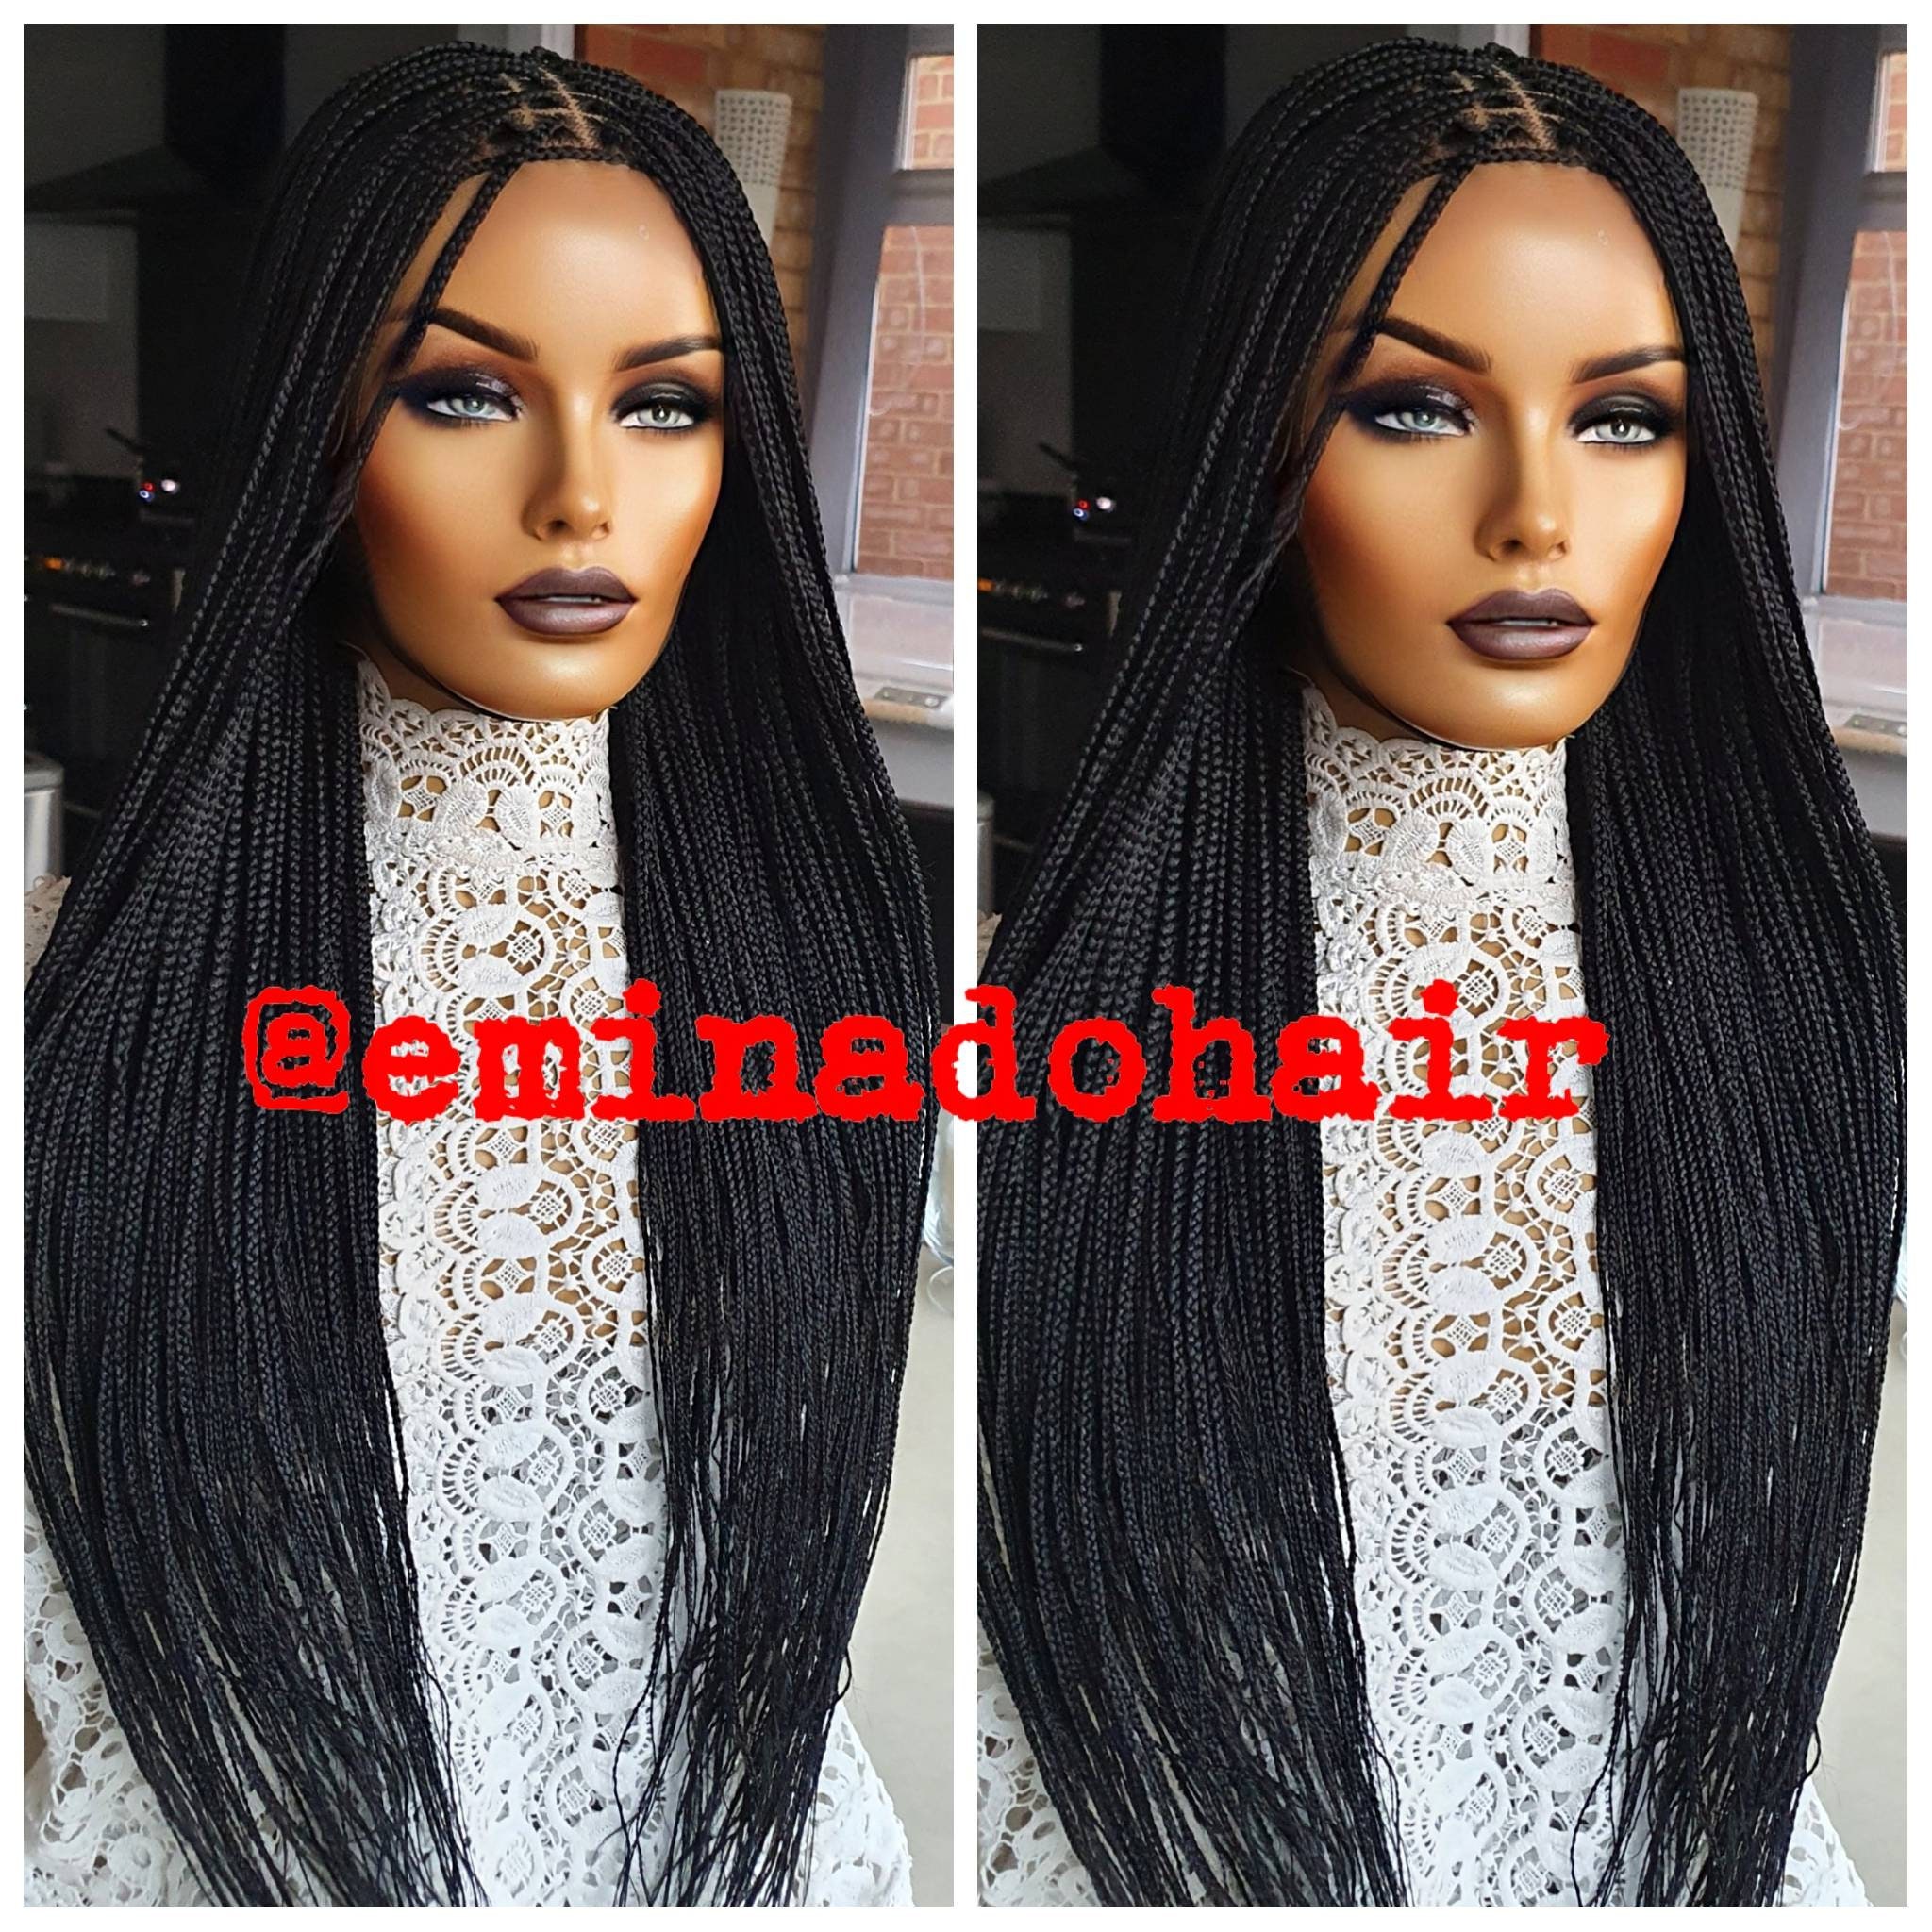 Ready to ship, full closure, micro braids, free parting, sales, braided  wigs, braids wigs - Wigs black, , braided, long, synthetic hair